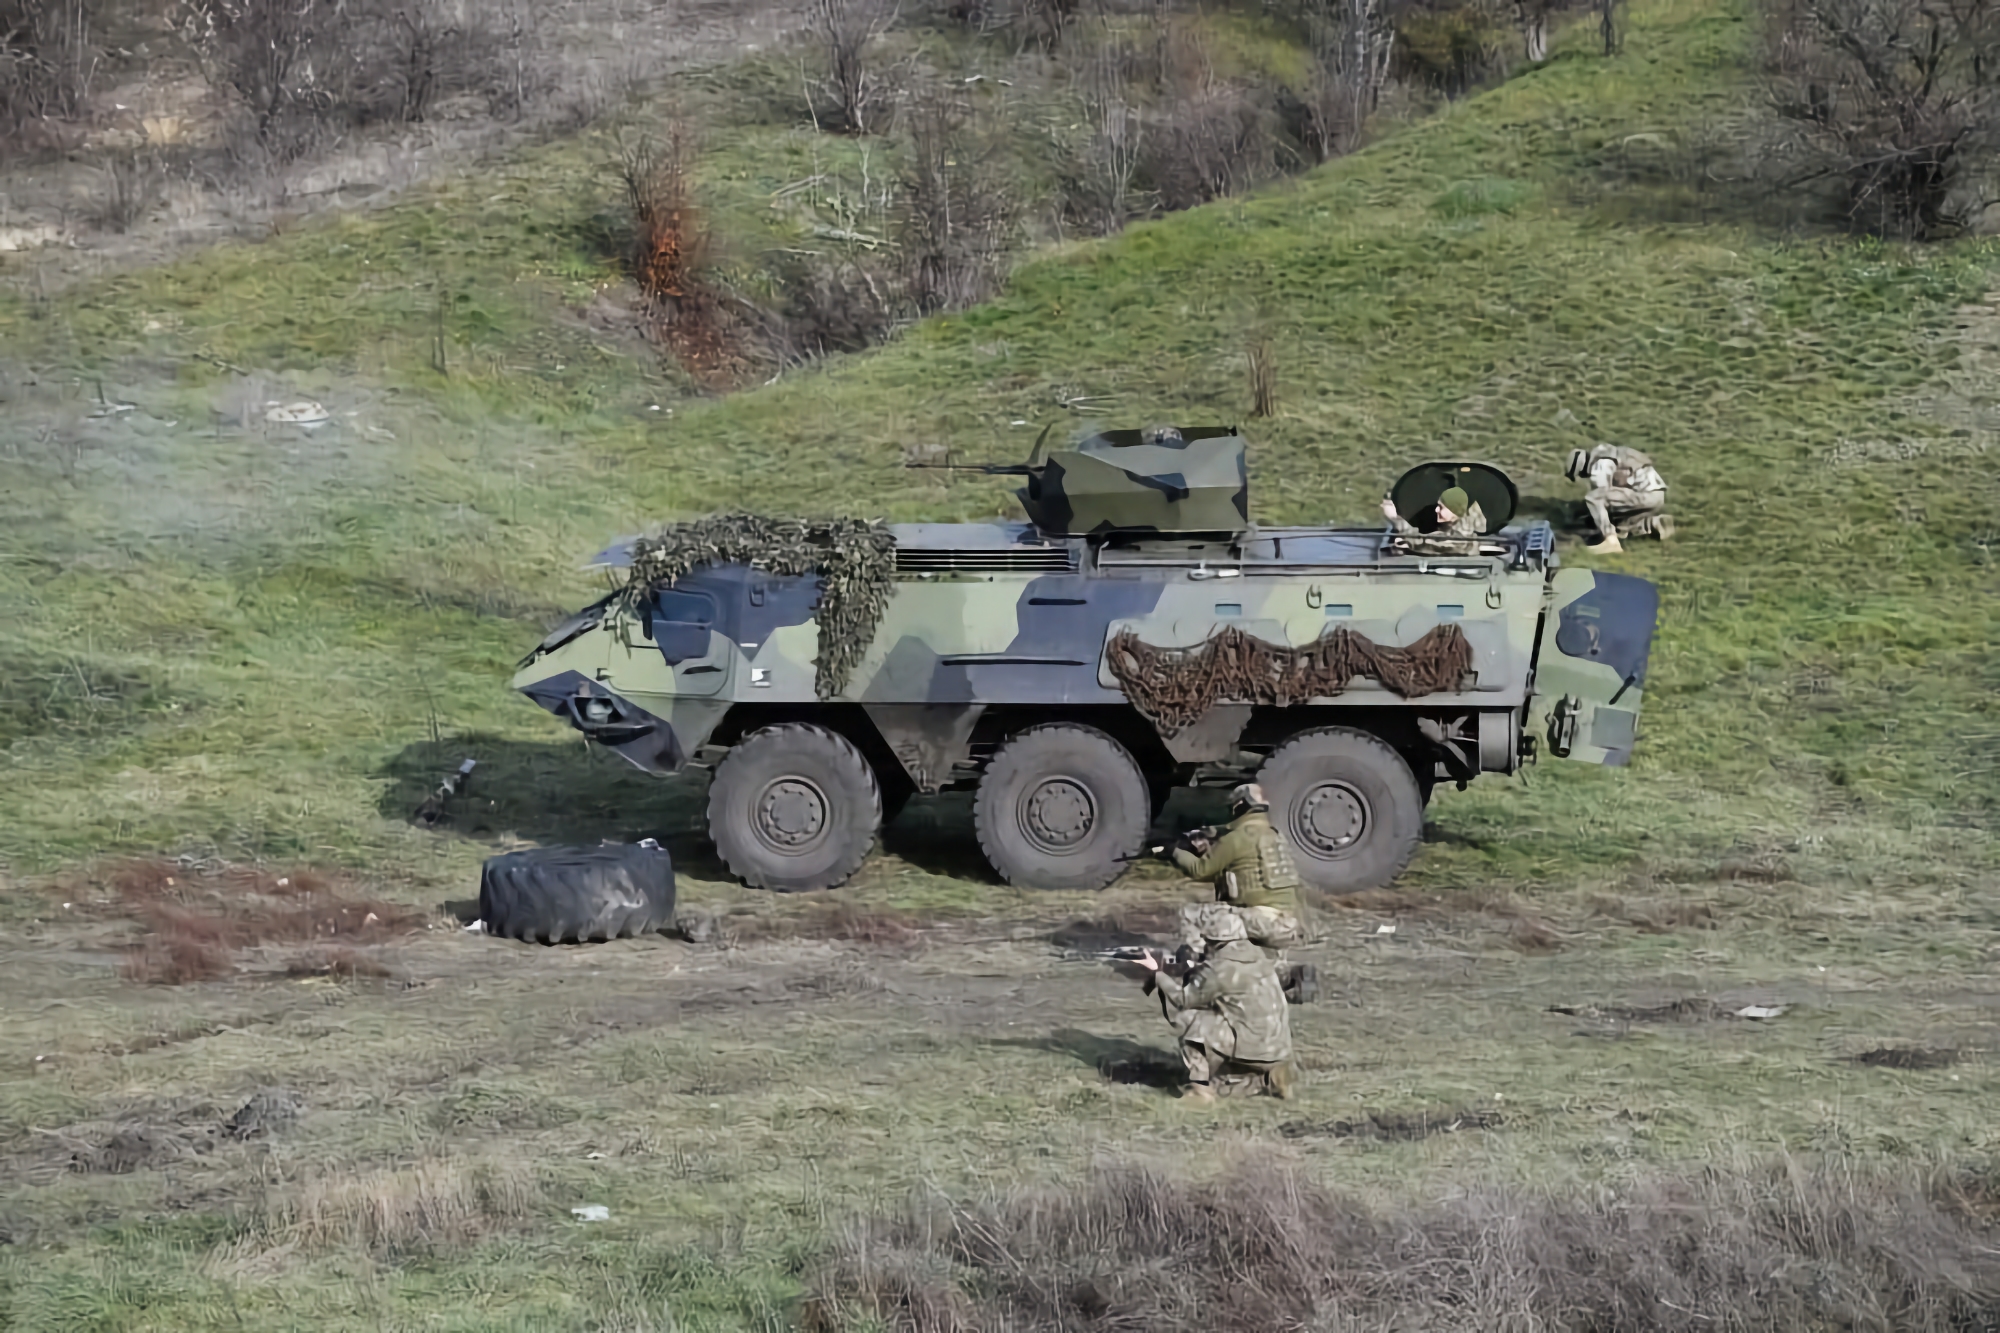 Ukrainian marines use Finnish Sisu XA-180 armored personnel carriers, which have 6×6 wheel arrangements, a cruising range of up to 800 km, and can swim